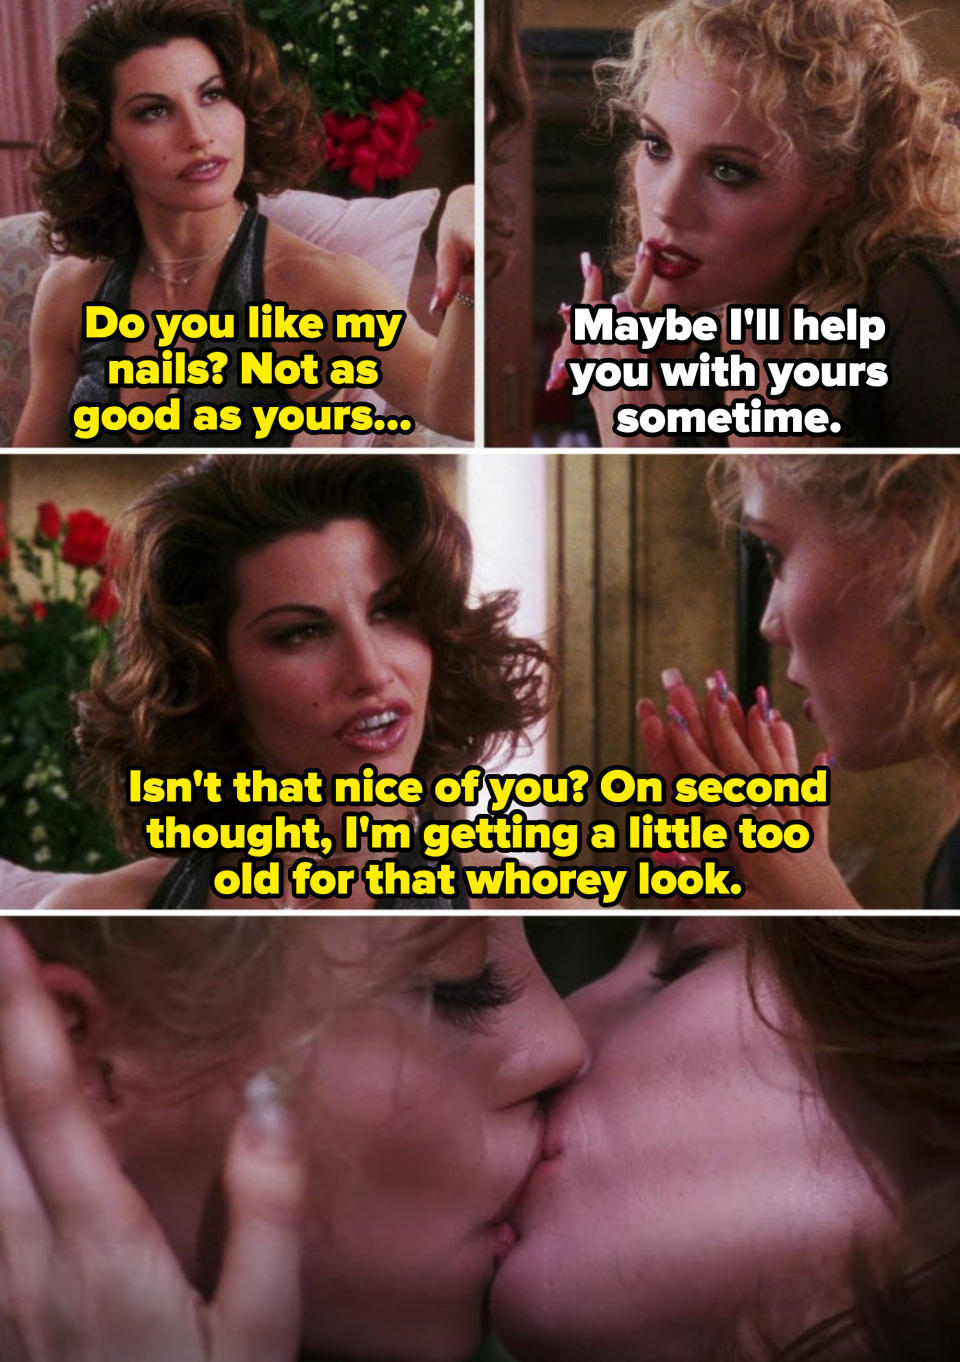 Cristal insulting Nomi's nails in "Showgirls;" Nomi and Cristal kissing in the hospital